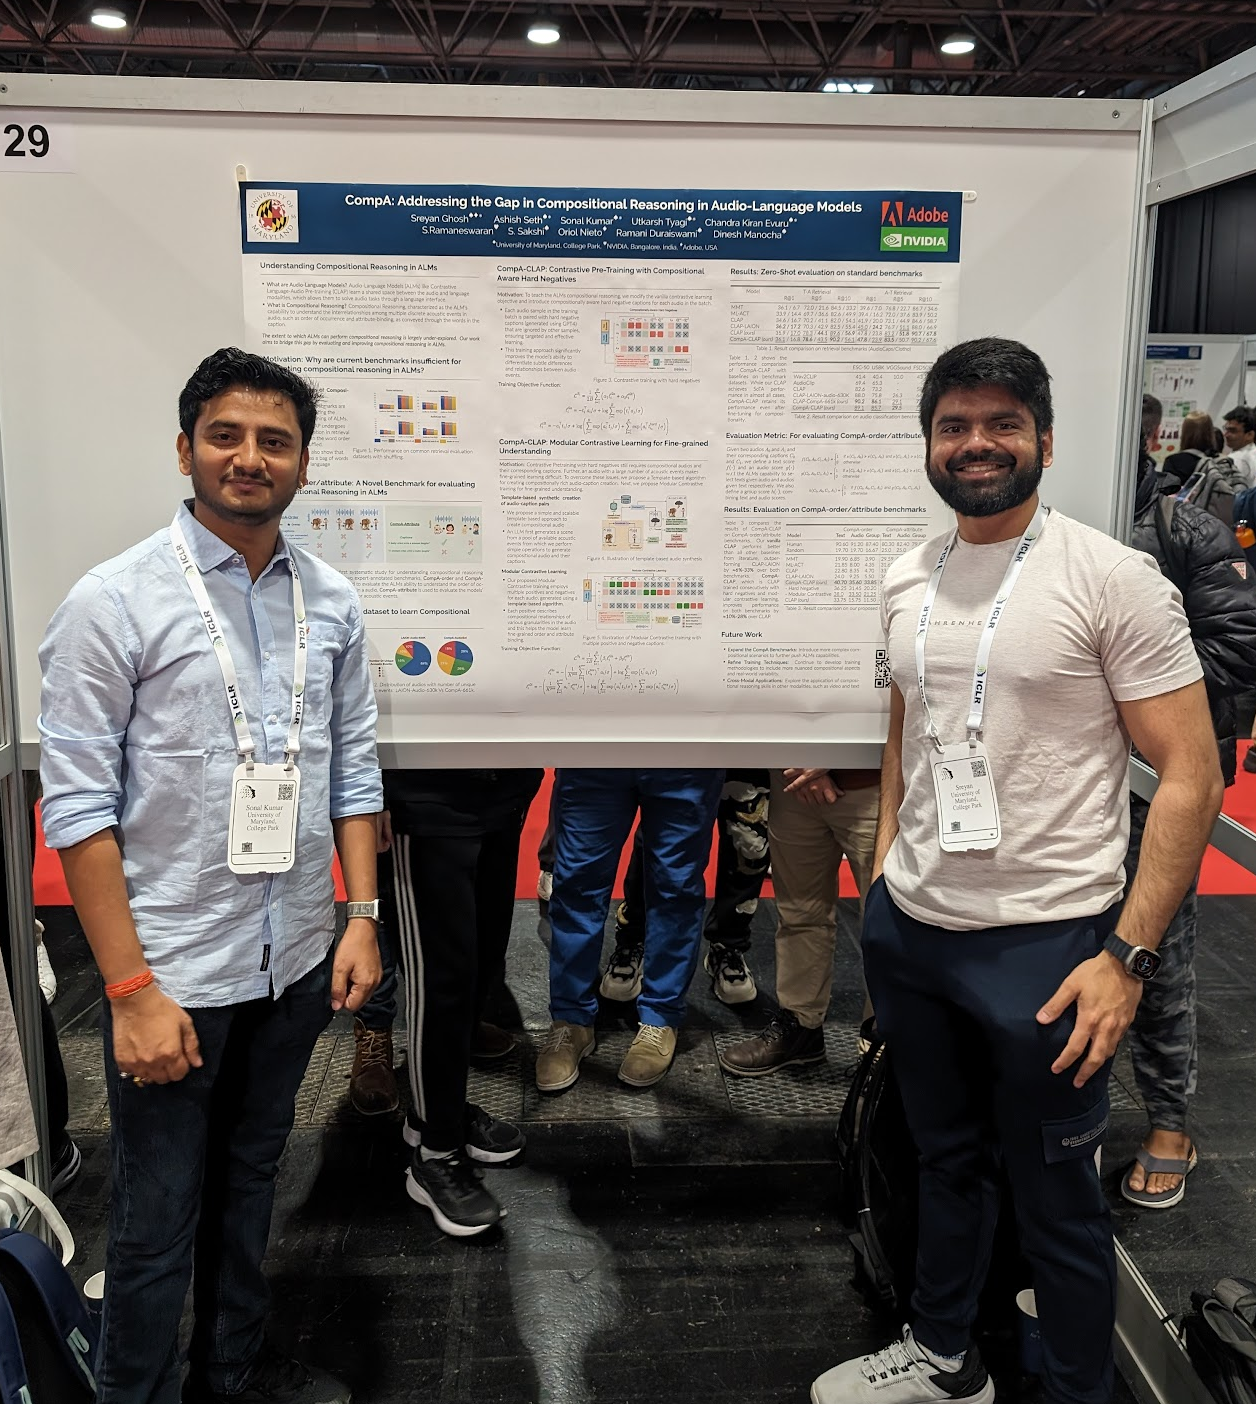 Presenting our poster in ICLR